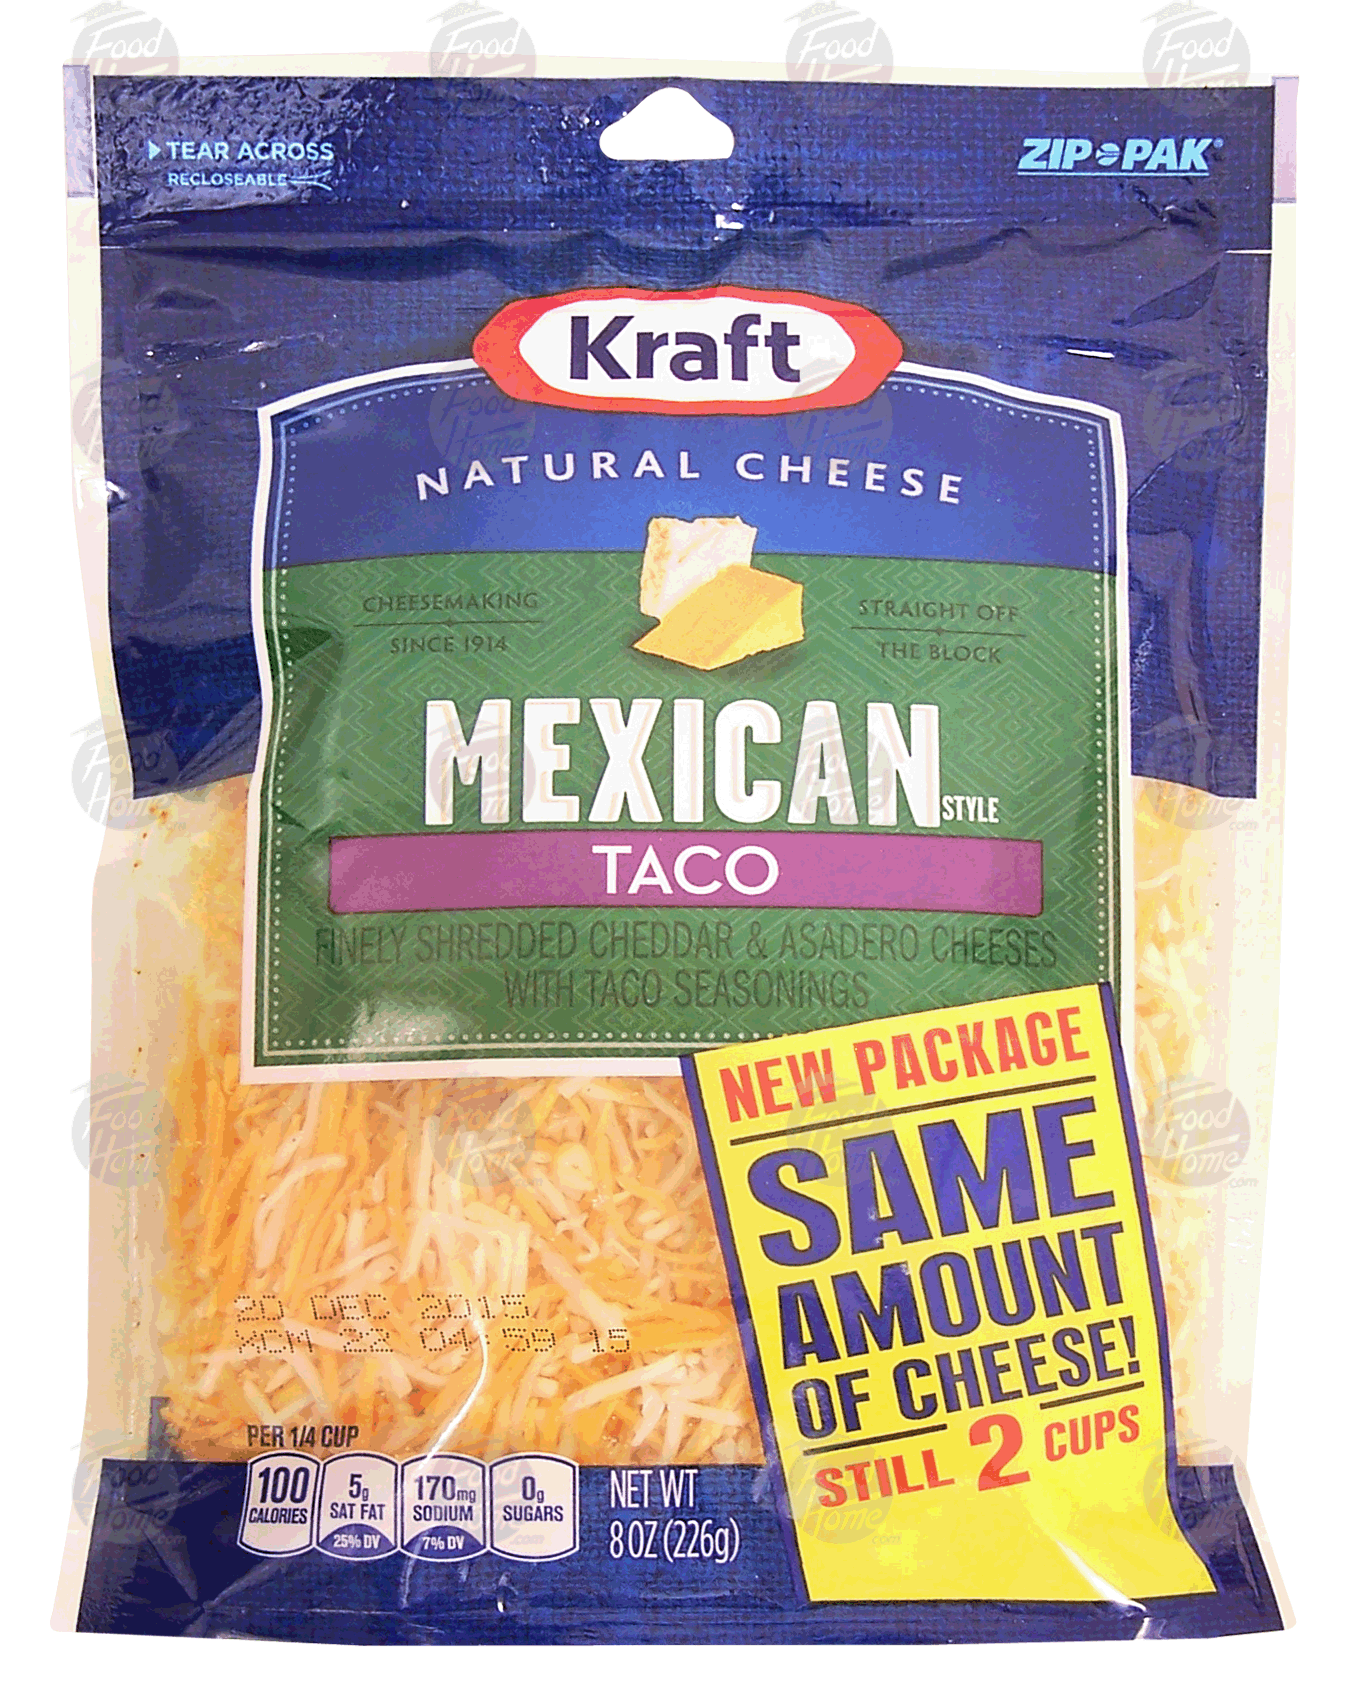 Kraft Natural Cheese mexican style, taco, finely shredded cheddar & asadero cheeses with taco seasonings Full-Size Picture